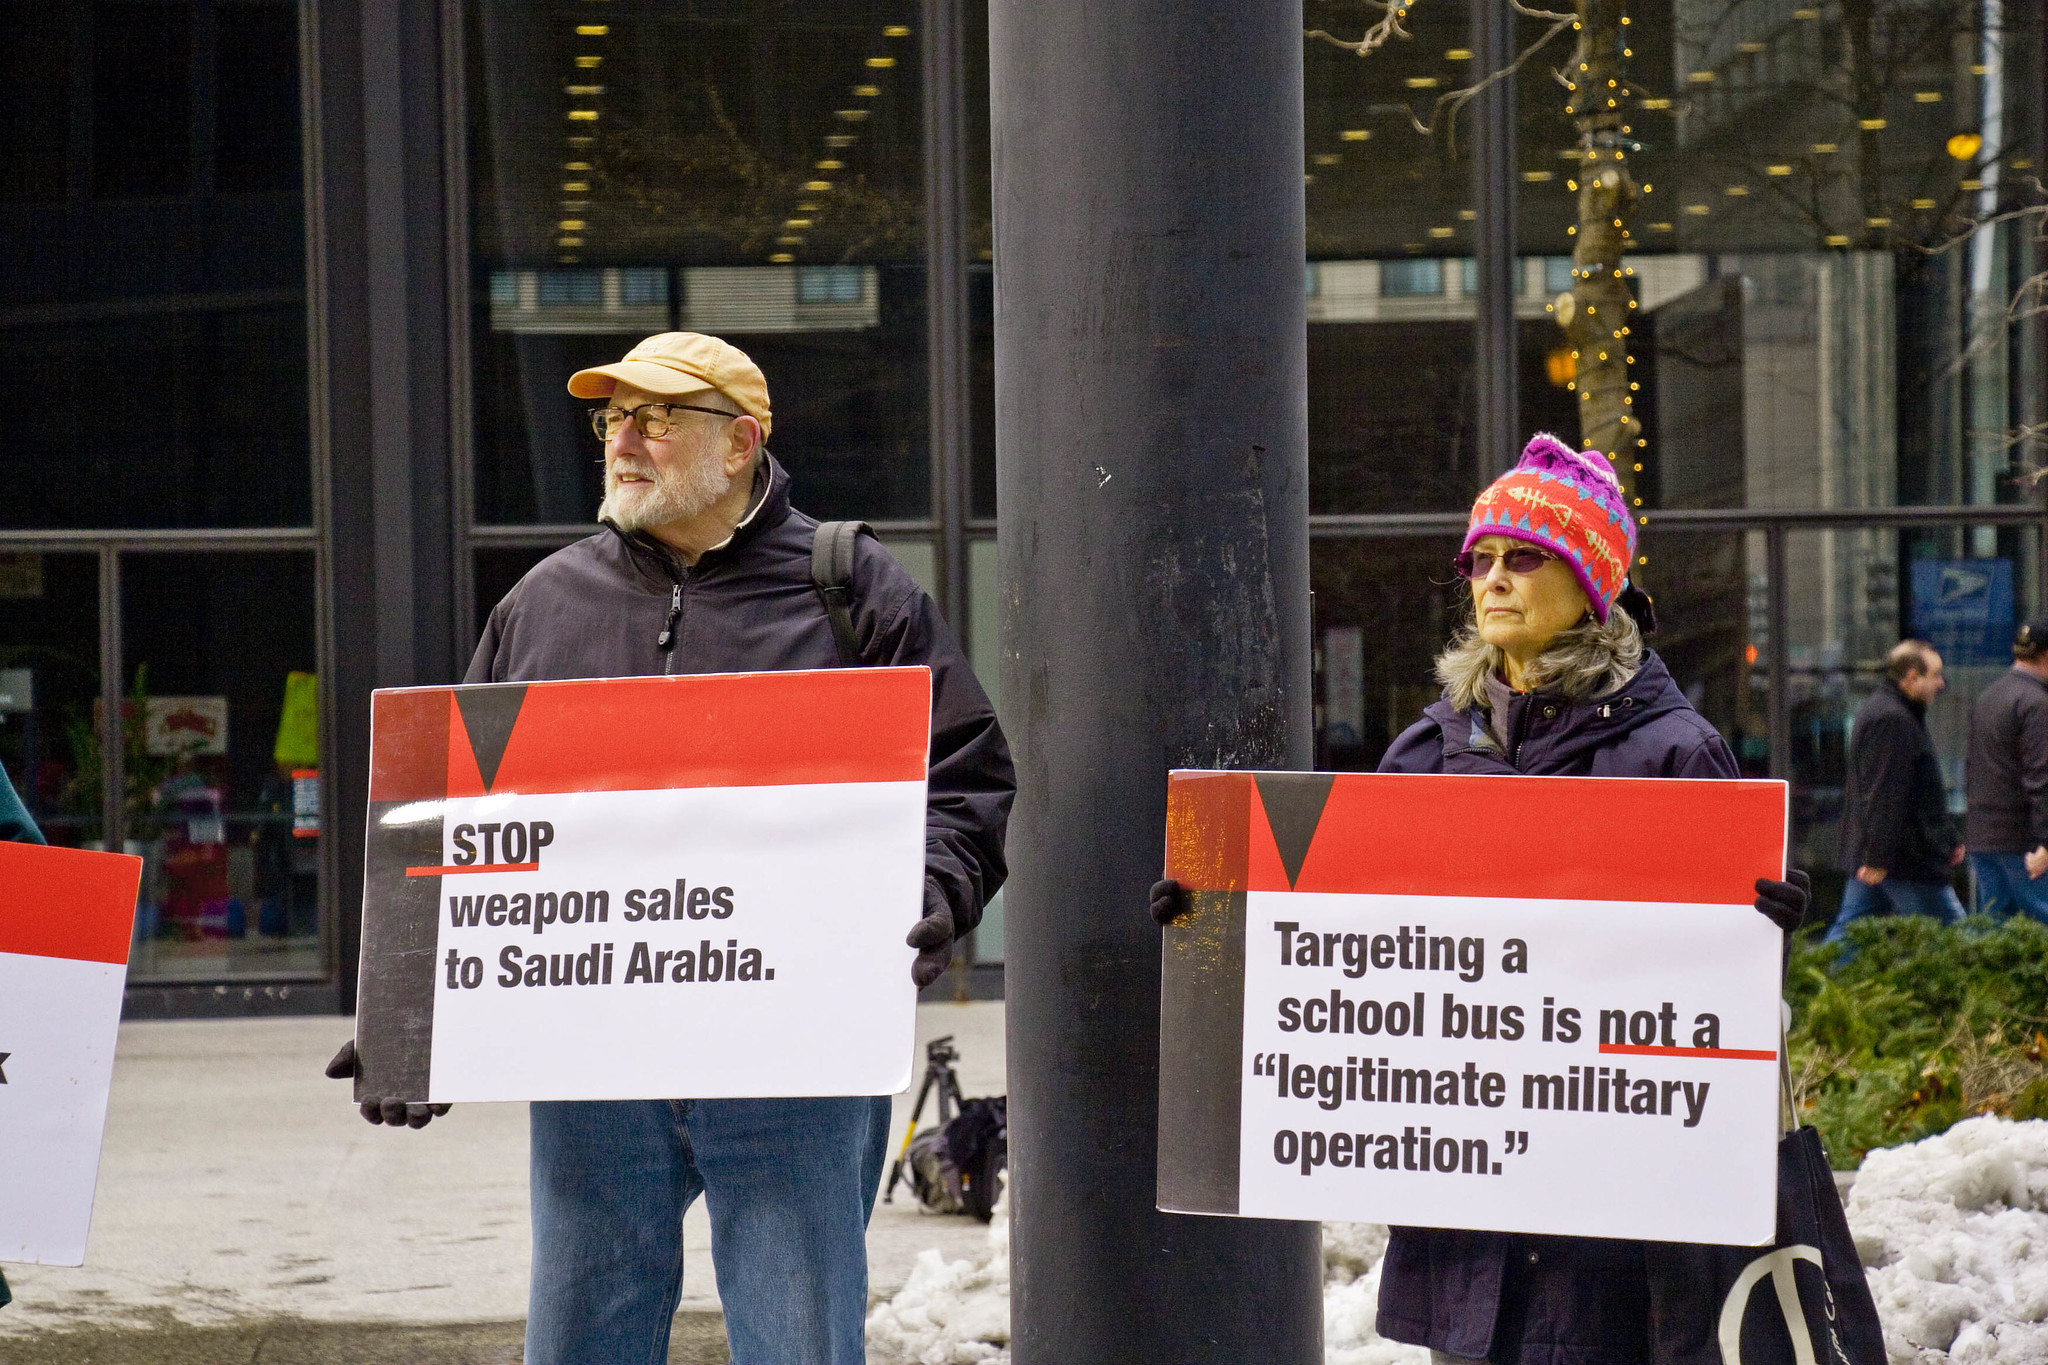 Signs Stop weapons sales to Saudi Arabia and Targeting a school bus is not a legitimate military operation; held by two activists, one wearing a beard and flat cap. The other wearing a pink and purple hat.